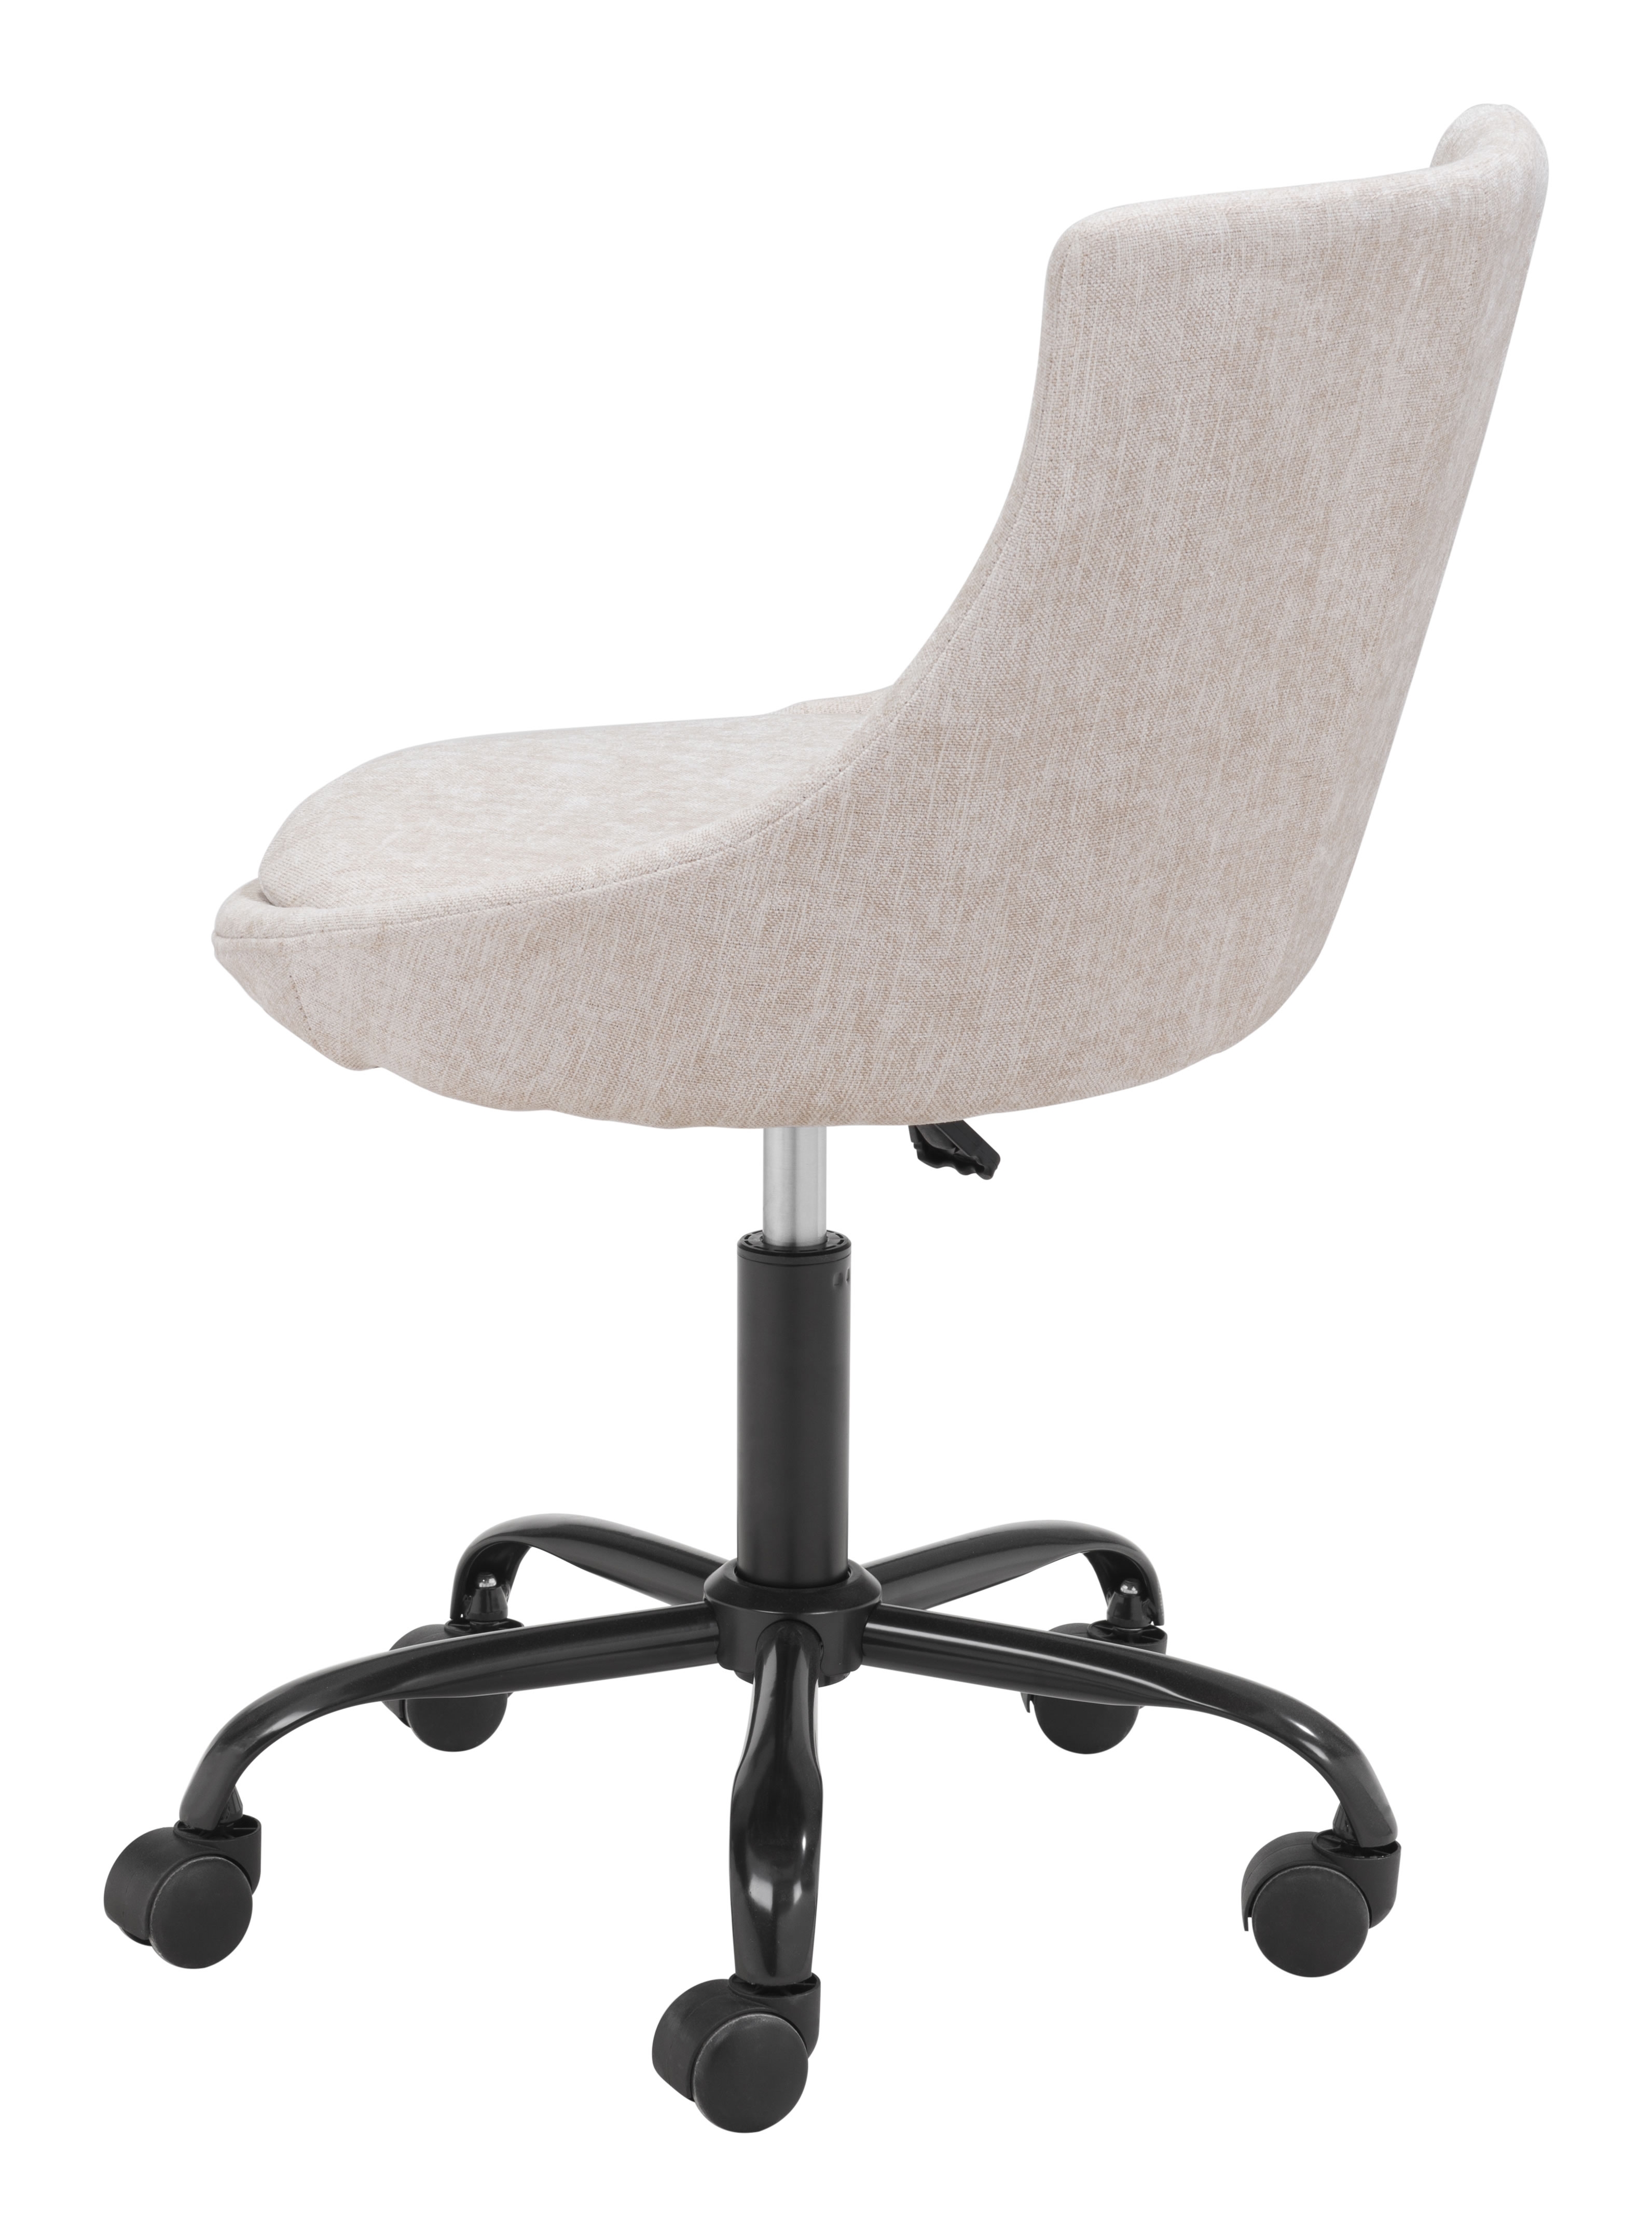 Maury Office Chair, Beige - Image 3